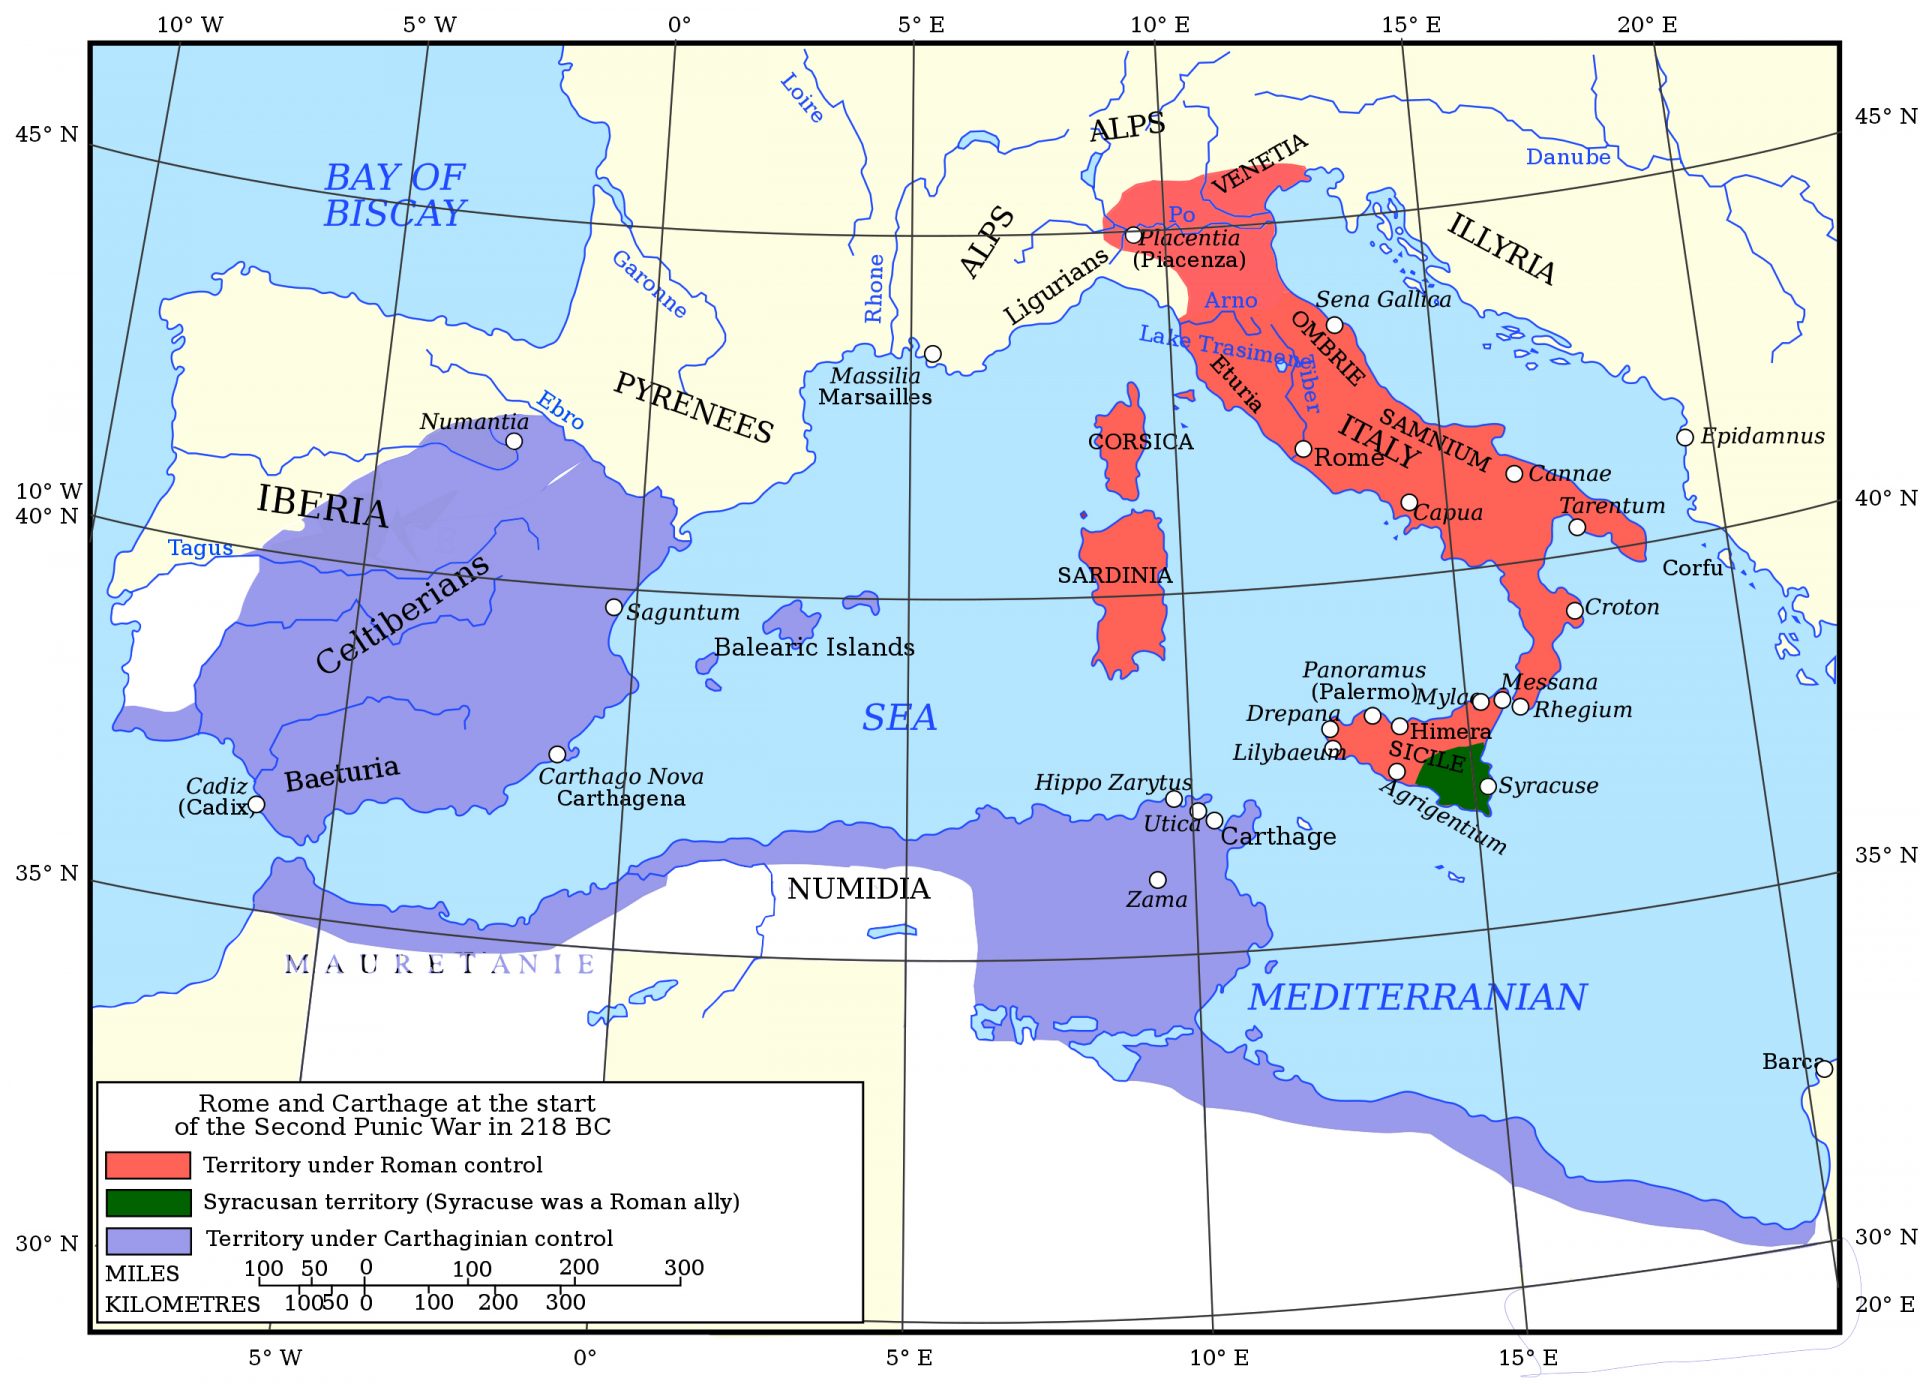 Map depicting the territories of Rome and Carthage at the start of the Second Punic War in 218 B.C. Areas under Roman control are shown in red and include parts of modern-day Italy, Corsica, and Sardinia. Territories under Carthaginian control are shown in purple and cover regions in modern-day Spain, North Africa, and a section of Sicily. The city of Syracuse in Sicily, marked in green, is indicated as a Roman ally. Notable locations such as Rome, Carthage, Saguntum, and others are labeled. The map also displays geographical features like the Mediterranean Sea, the Bay of Biscay, and the Pyrenees mountains.